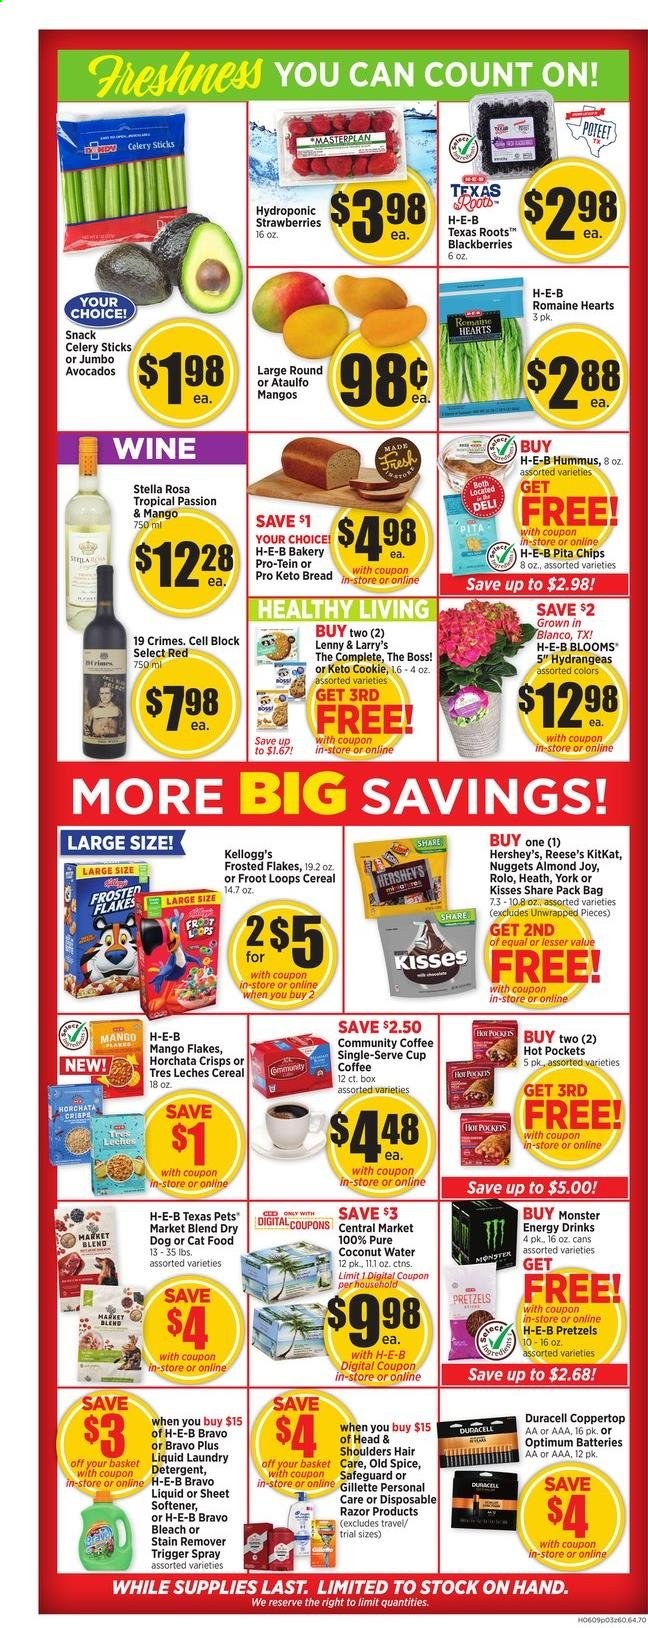 thumbnail - H-E-B Flyer - 06/09/2021 - 06/15/2021 - Sales products - pretzels, avocado, blackberries, strawberries, hot pocket, nuggets, hummus, Reese's, Hershey's, snack, KitKat, Kellogg's, chips, celery sticks, pita chips, cereals, Frosted Flakes, spice, energy drink, Monster, coconut water, Monster Energy, coffee, wine, detergent, bleach, stain remover, fabric softener, Joy, Old Spice, Head & Shoulders, Gillette, disposable razor, cup, battery, Duracell, animal food, cat food, Optimum, bag. Page 3.